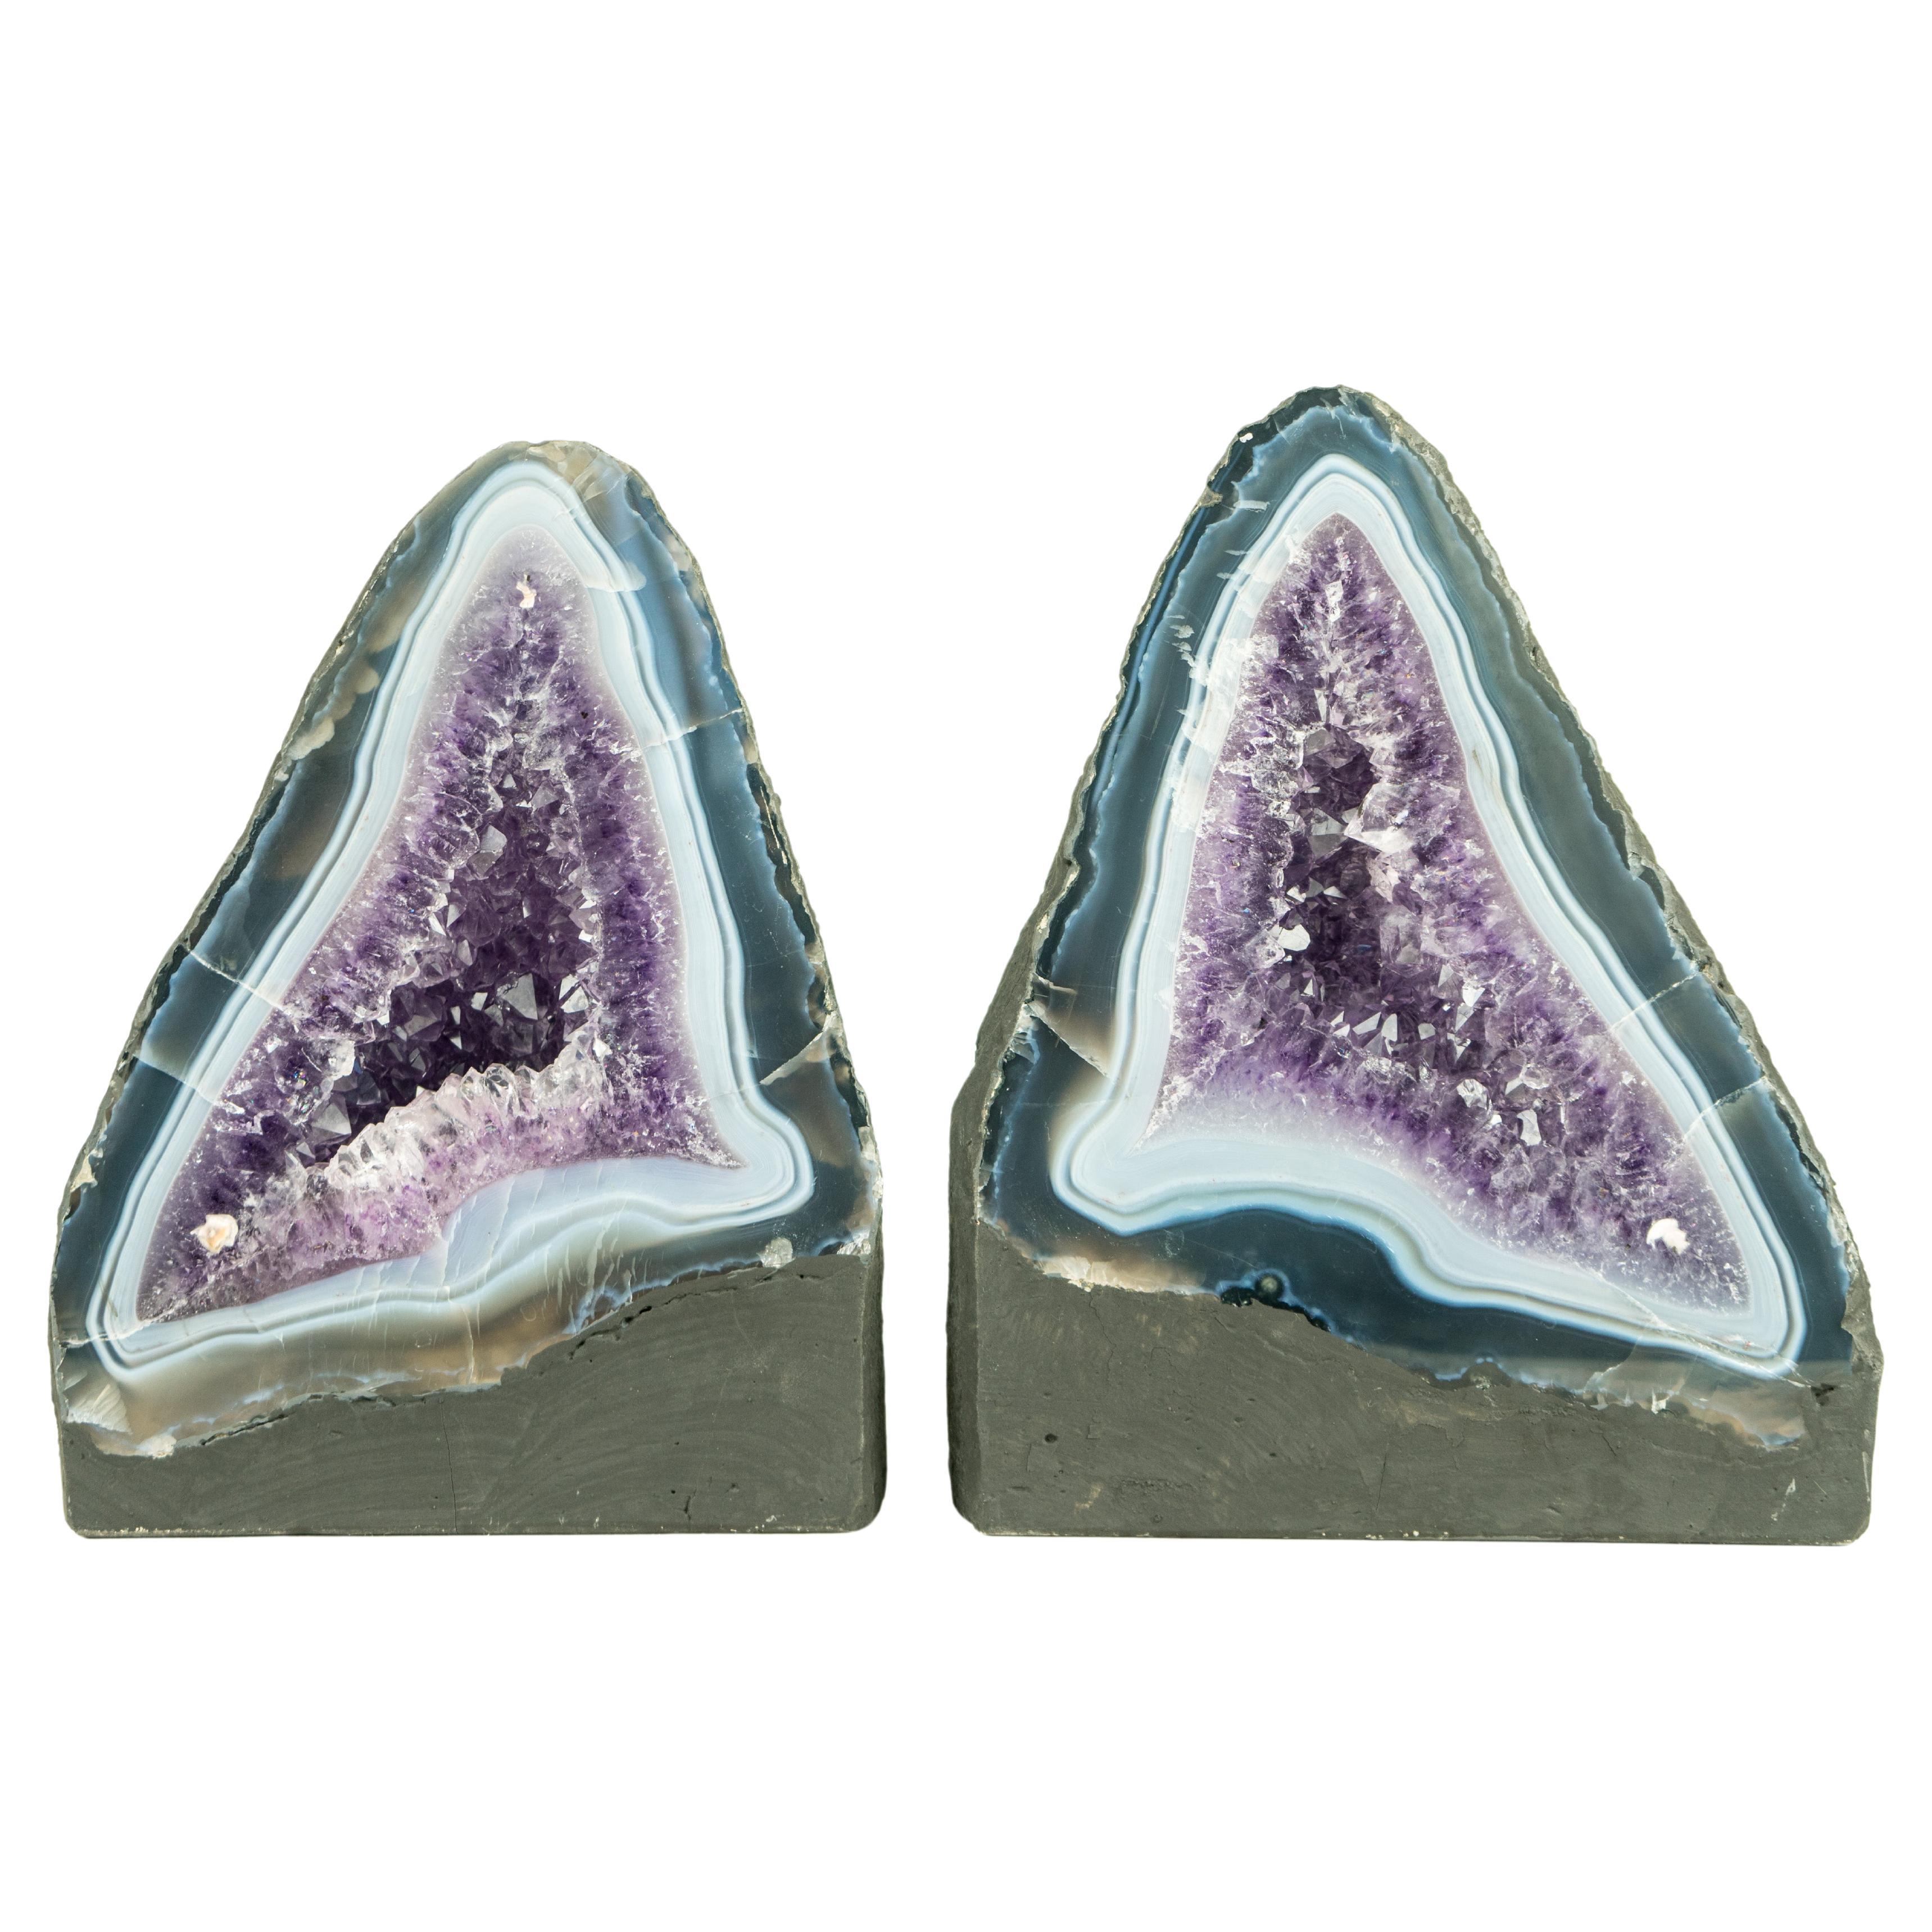 Pair of Book-Matching Blue Lace Agate Geodes with Crystal Amethyst For Sale